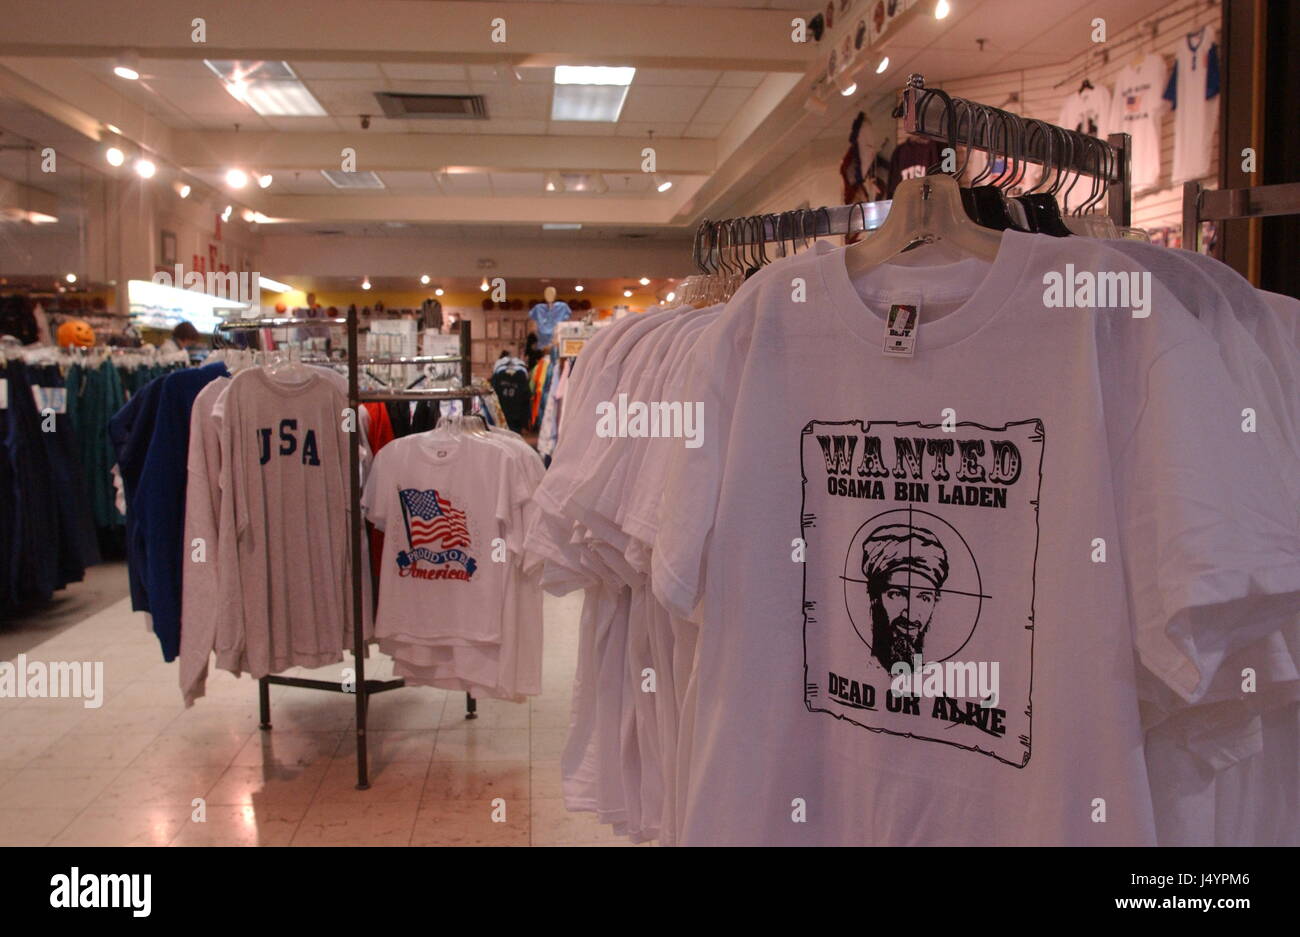 Osama Bin Laden target shirts, and other merchandise to commemorate the  9-11 terrorist attack on the United States leading to the war on terror,  for sale in a mall in Joplin, Missouri